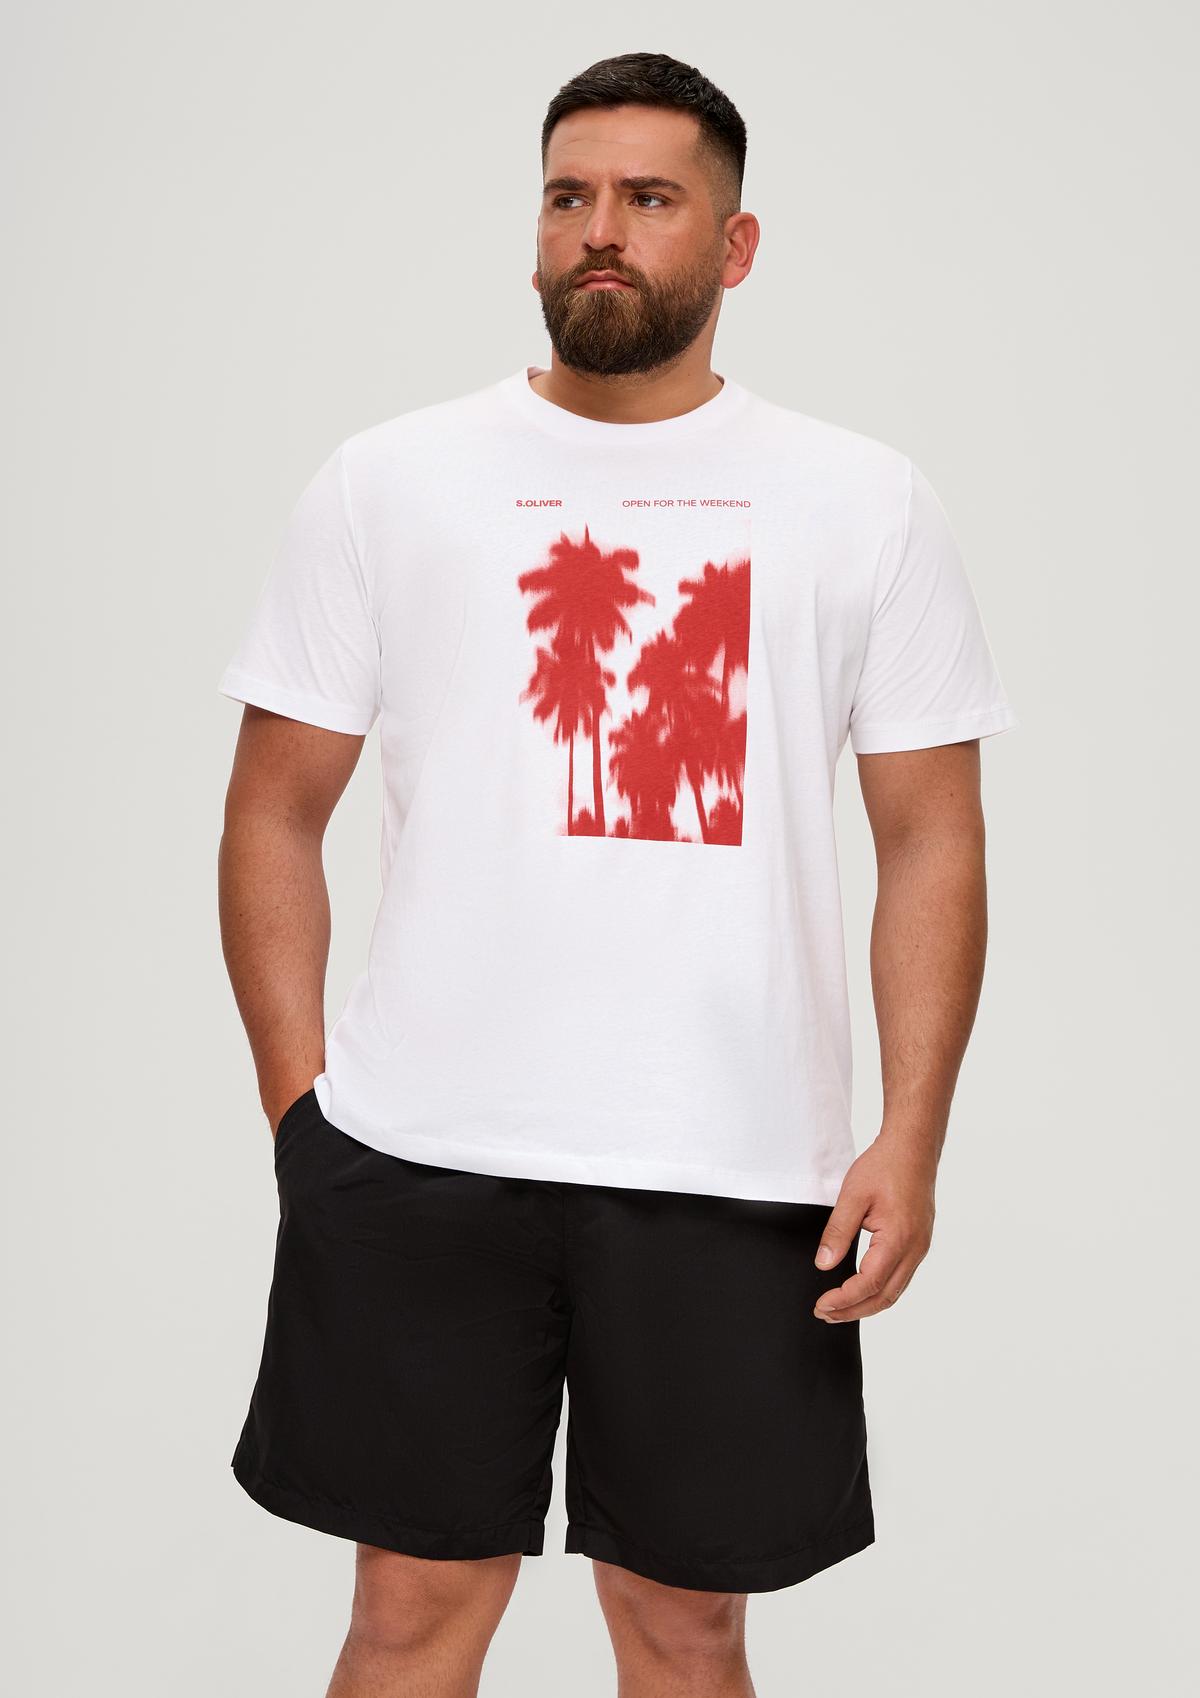 T-shirt in pure cotton - white